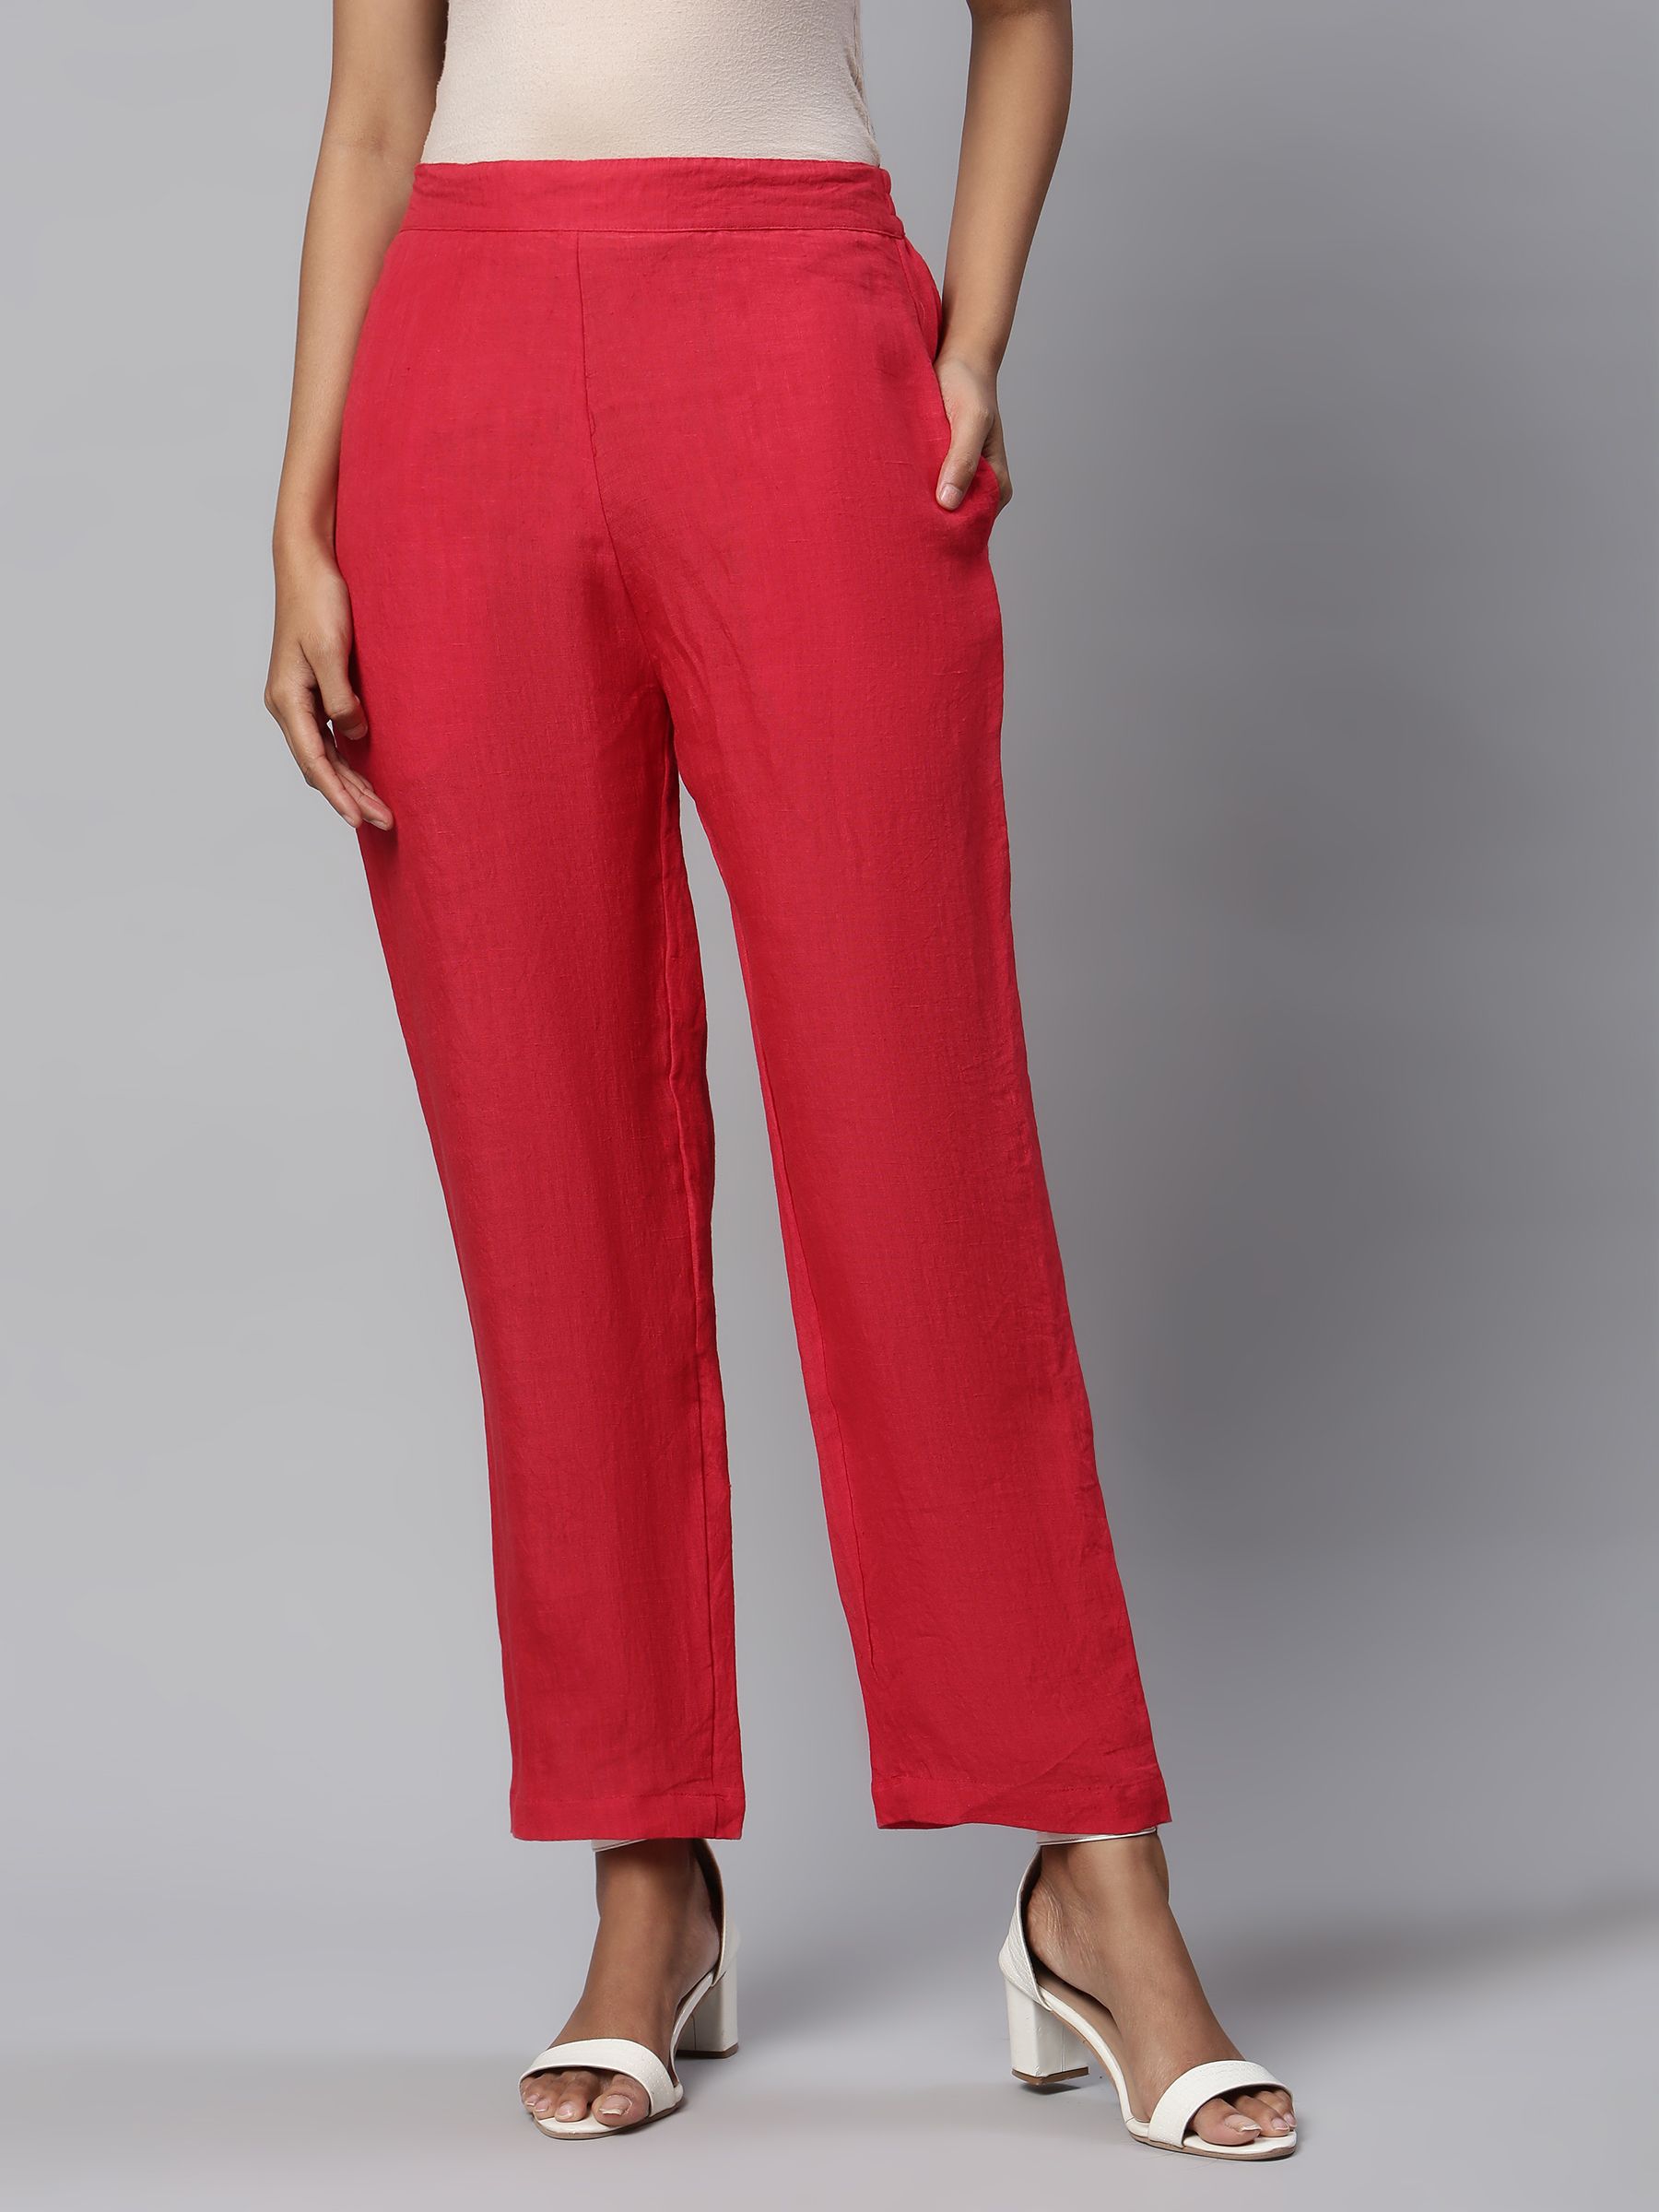 Amazon Shoppers Love These Affordable Linen Pants for Summer